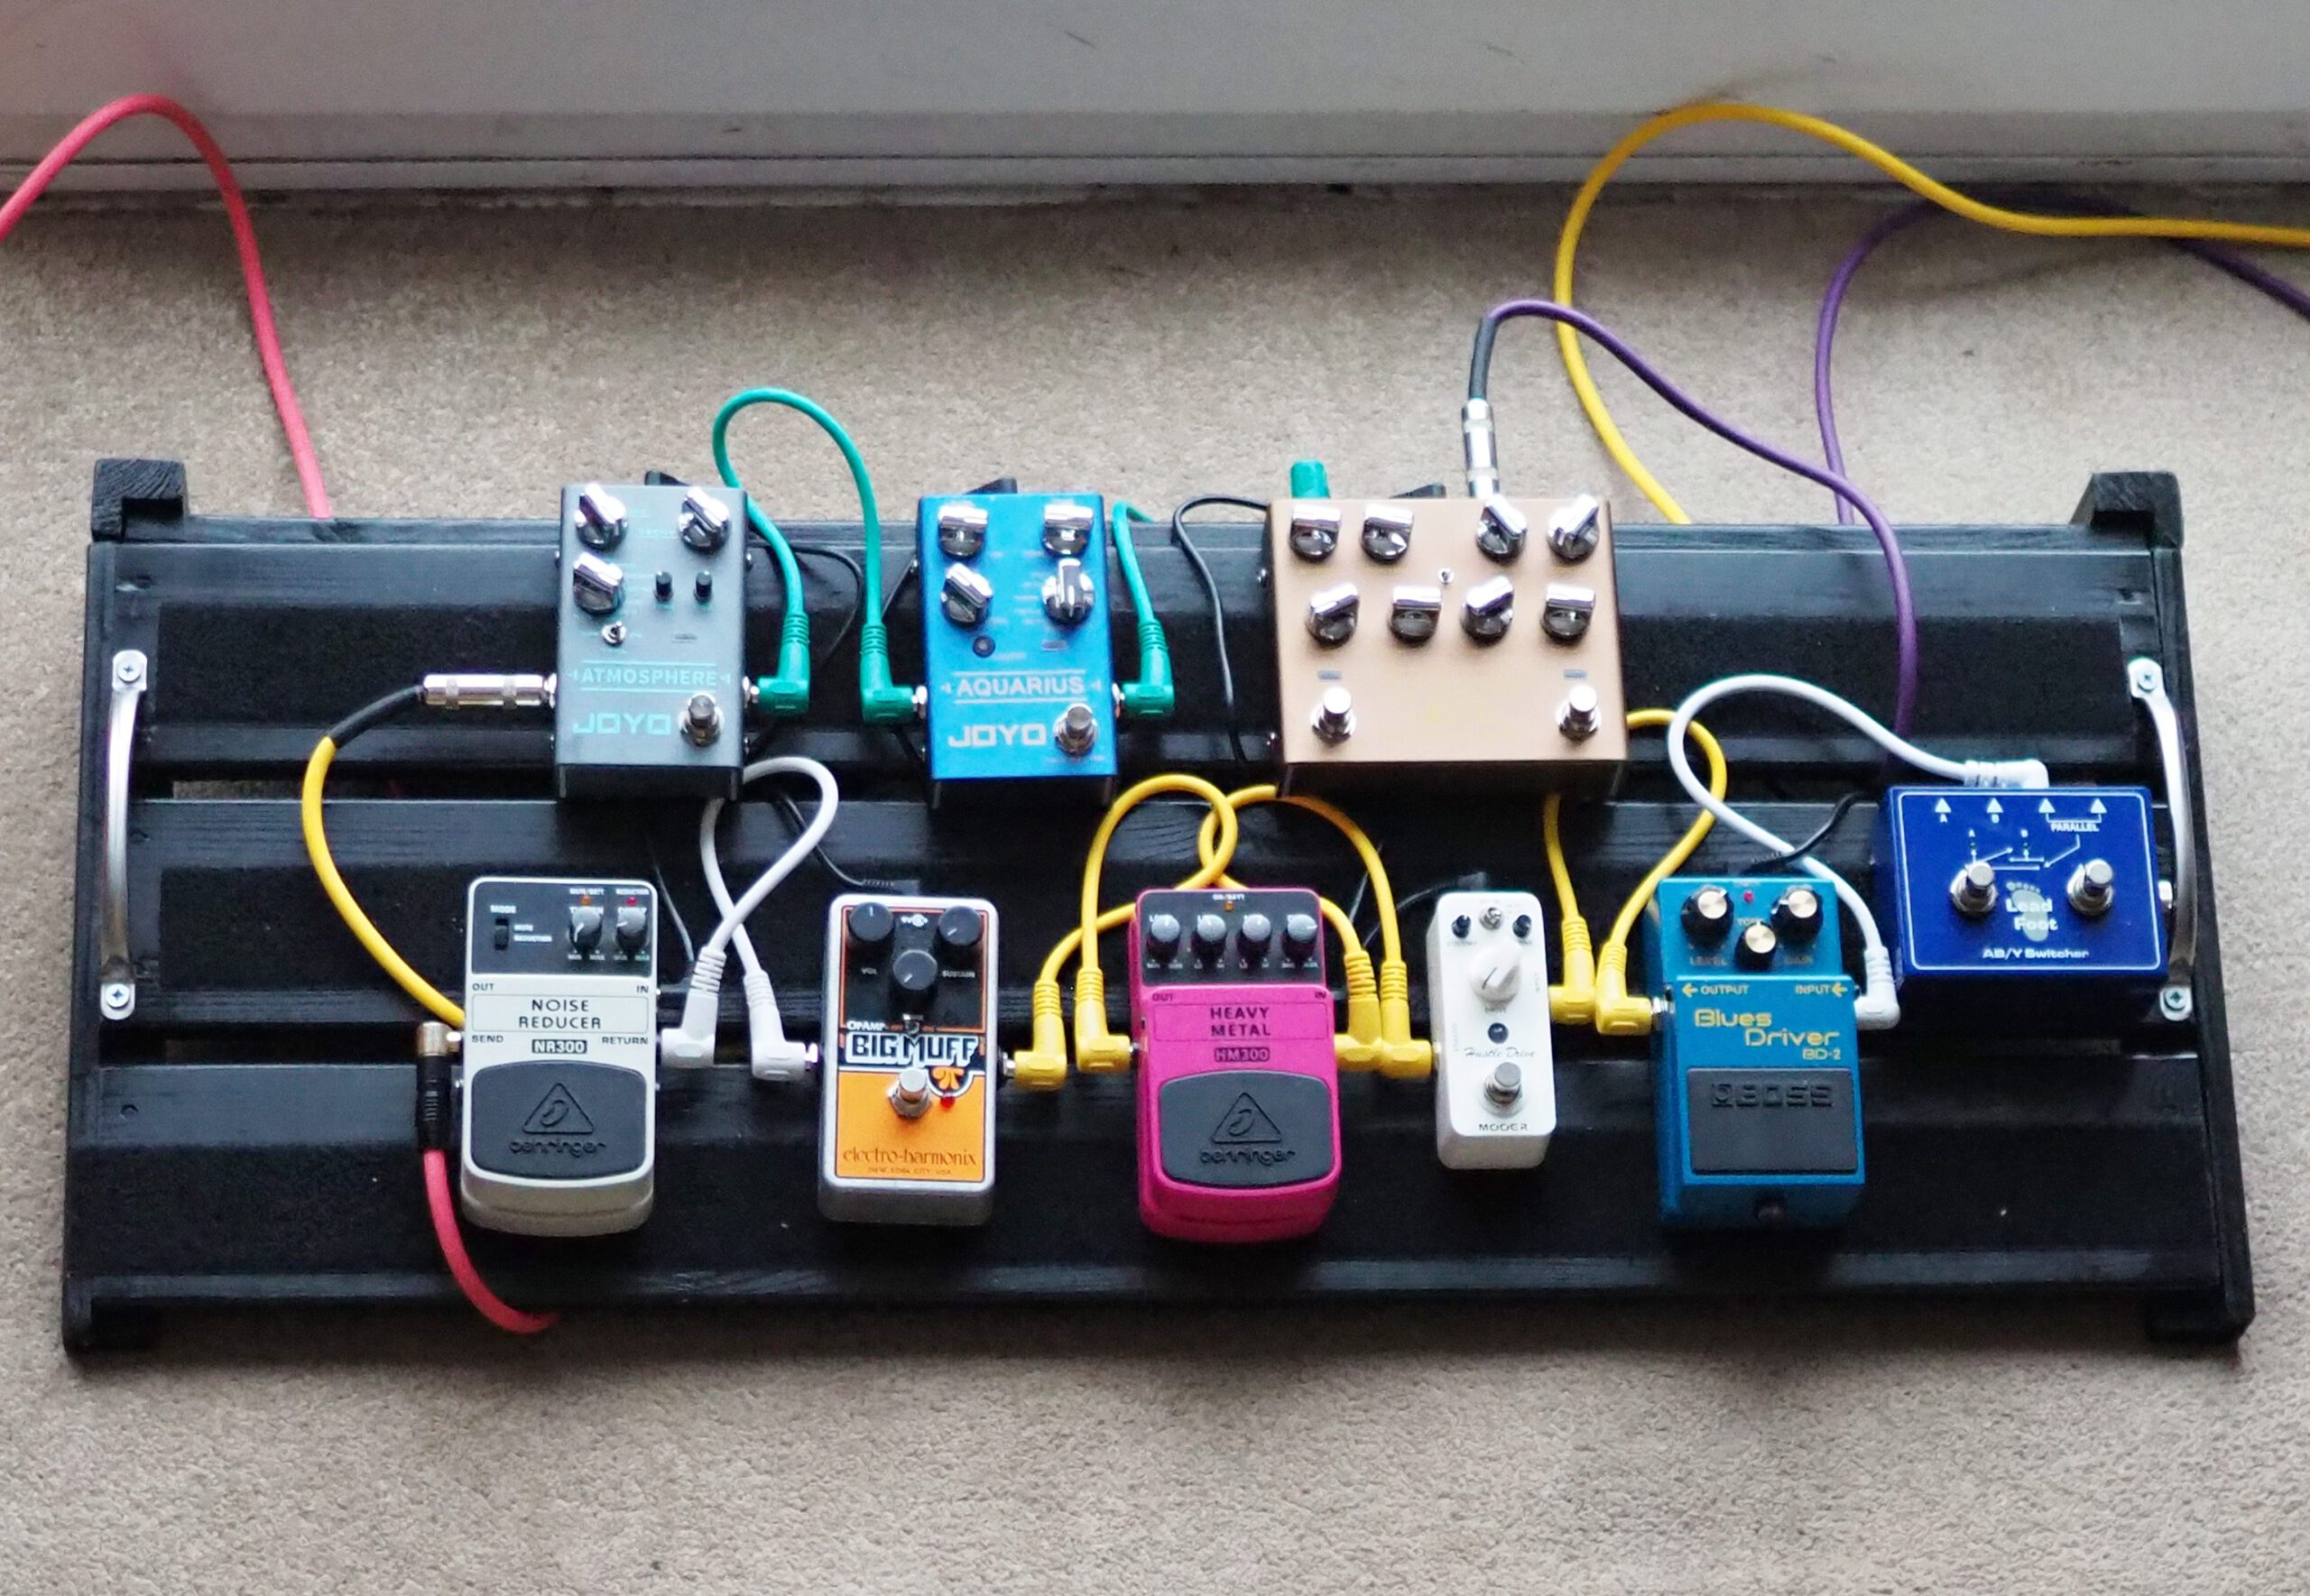 This is a very unique way to attach pedals to a custom pedal board without  using any velcro